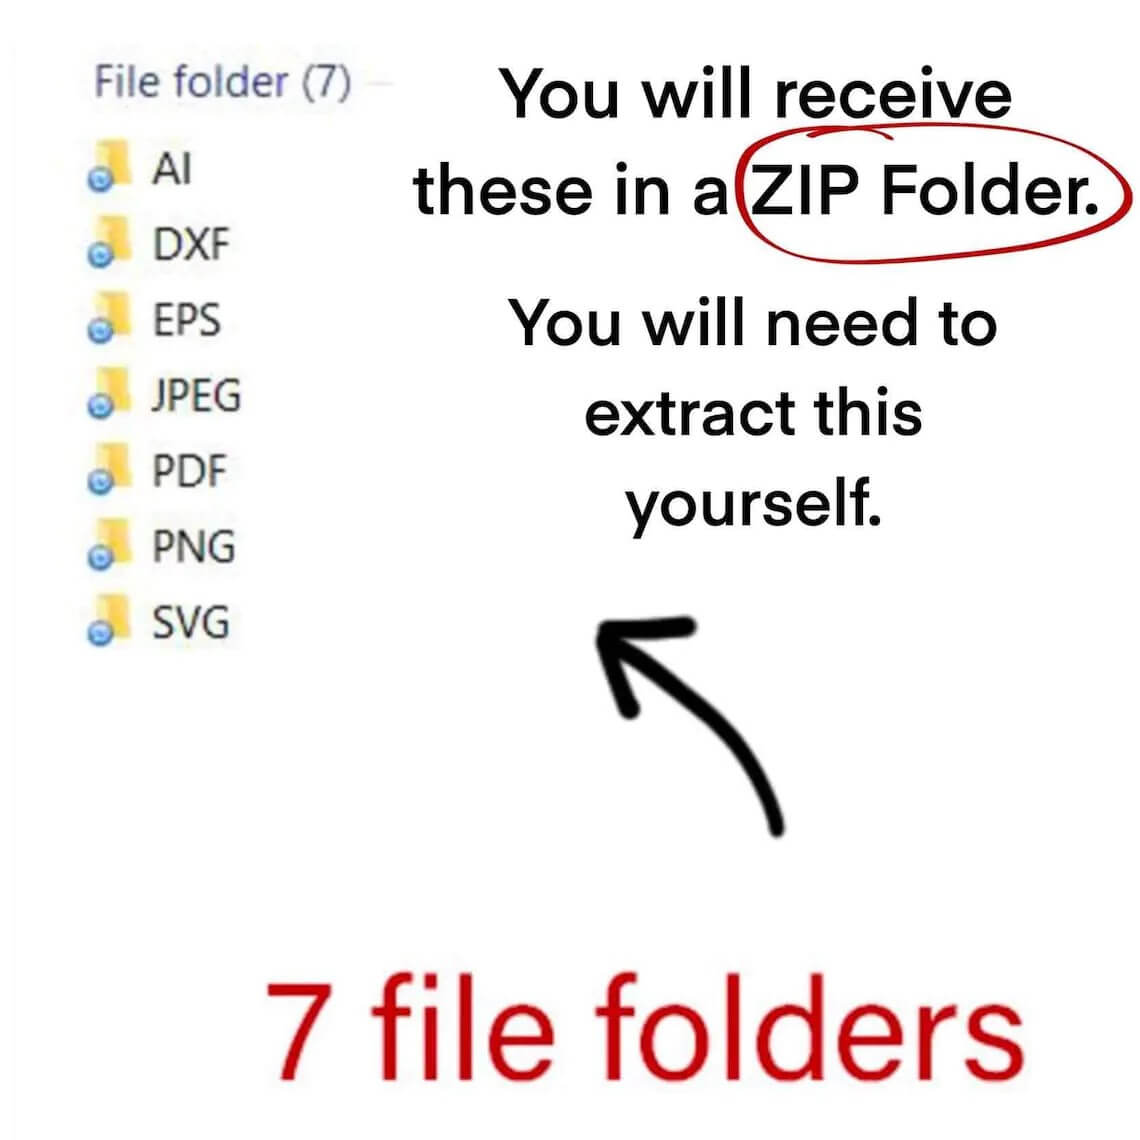 You will receive these in a ZIP Folder.